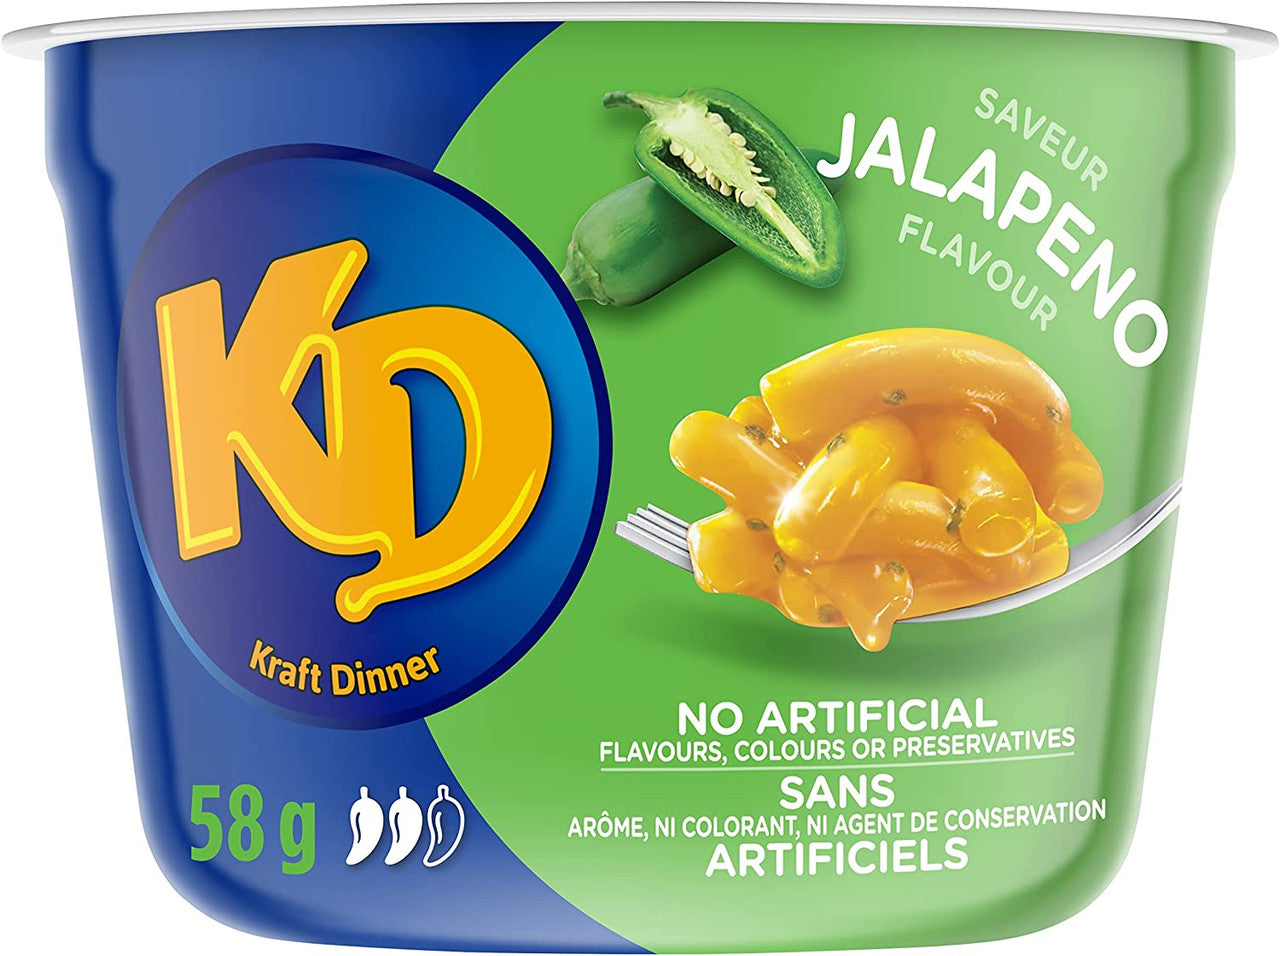 KD Kraft Dinner Jalapeno Flavor Snack Cups, 58g/2 oz. 1 Cup (Imported from Canada)